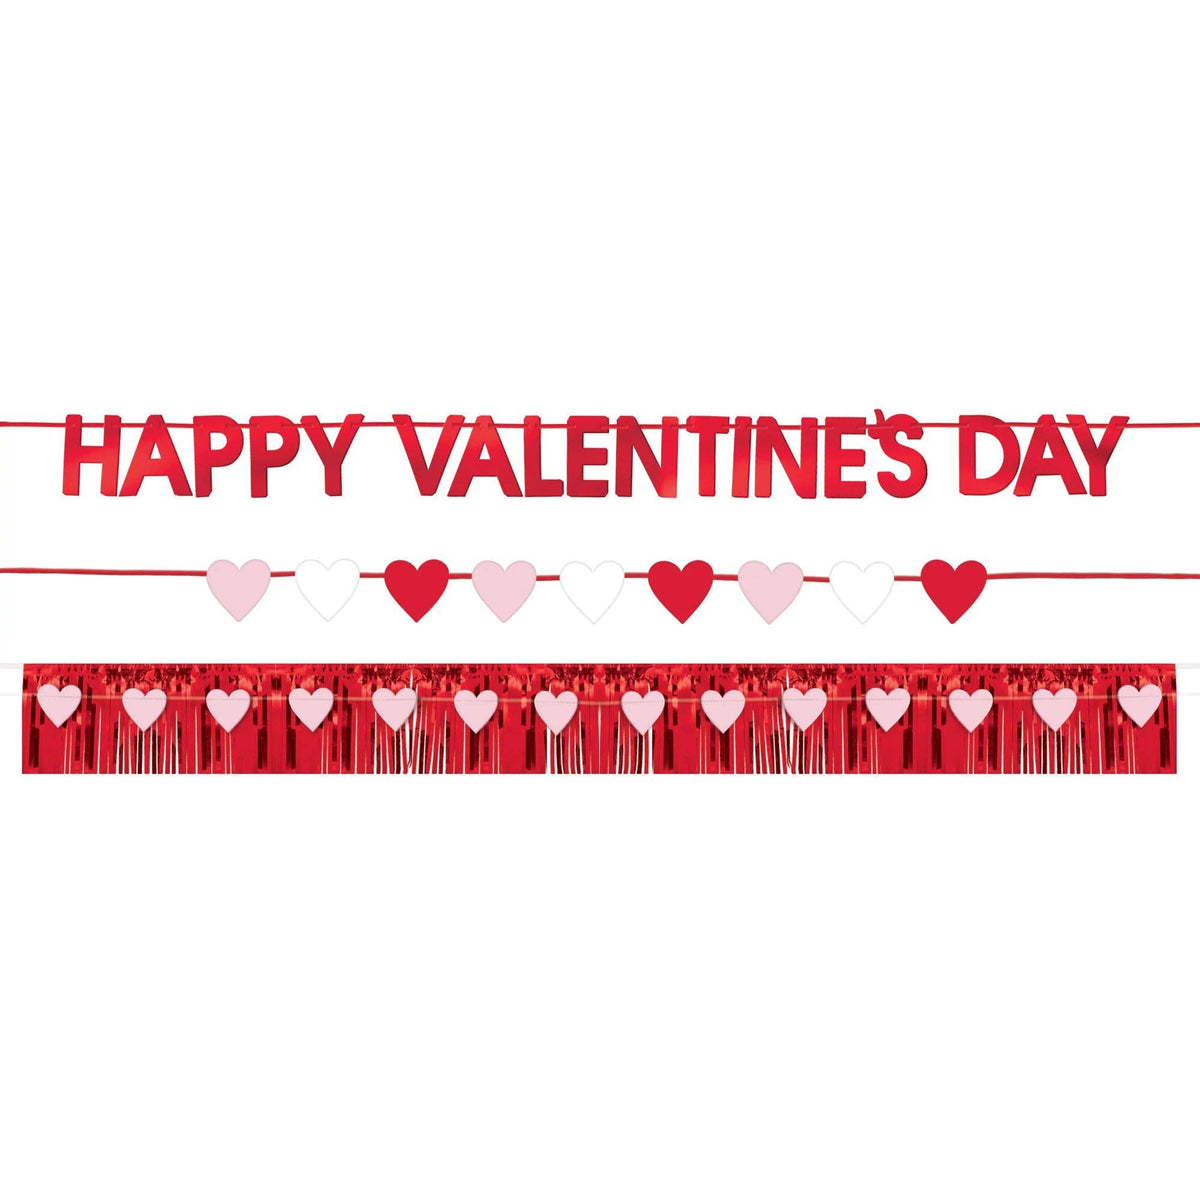 AMSCAN CA Valentine's Day Happy Valentine's Day Foil Banner Kit, 72 Inches, 1 Count